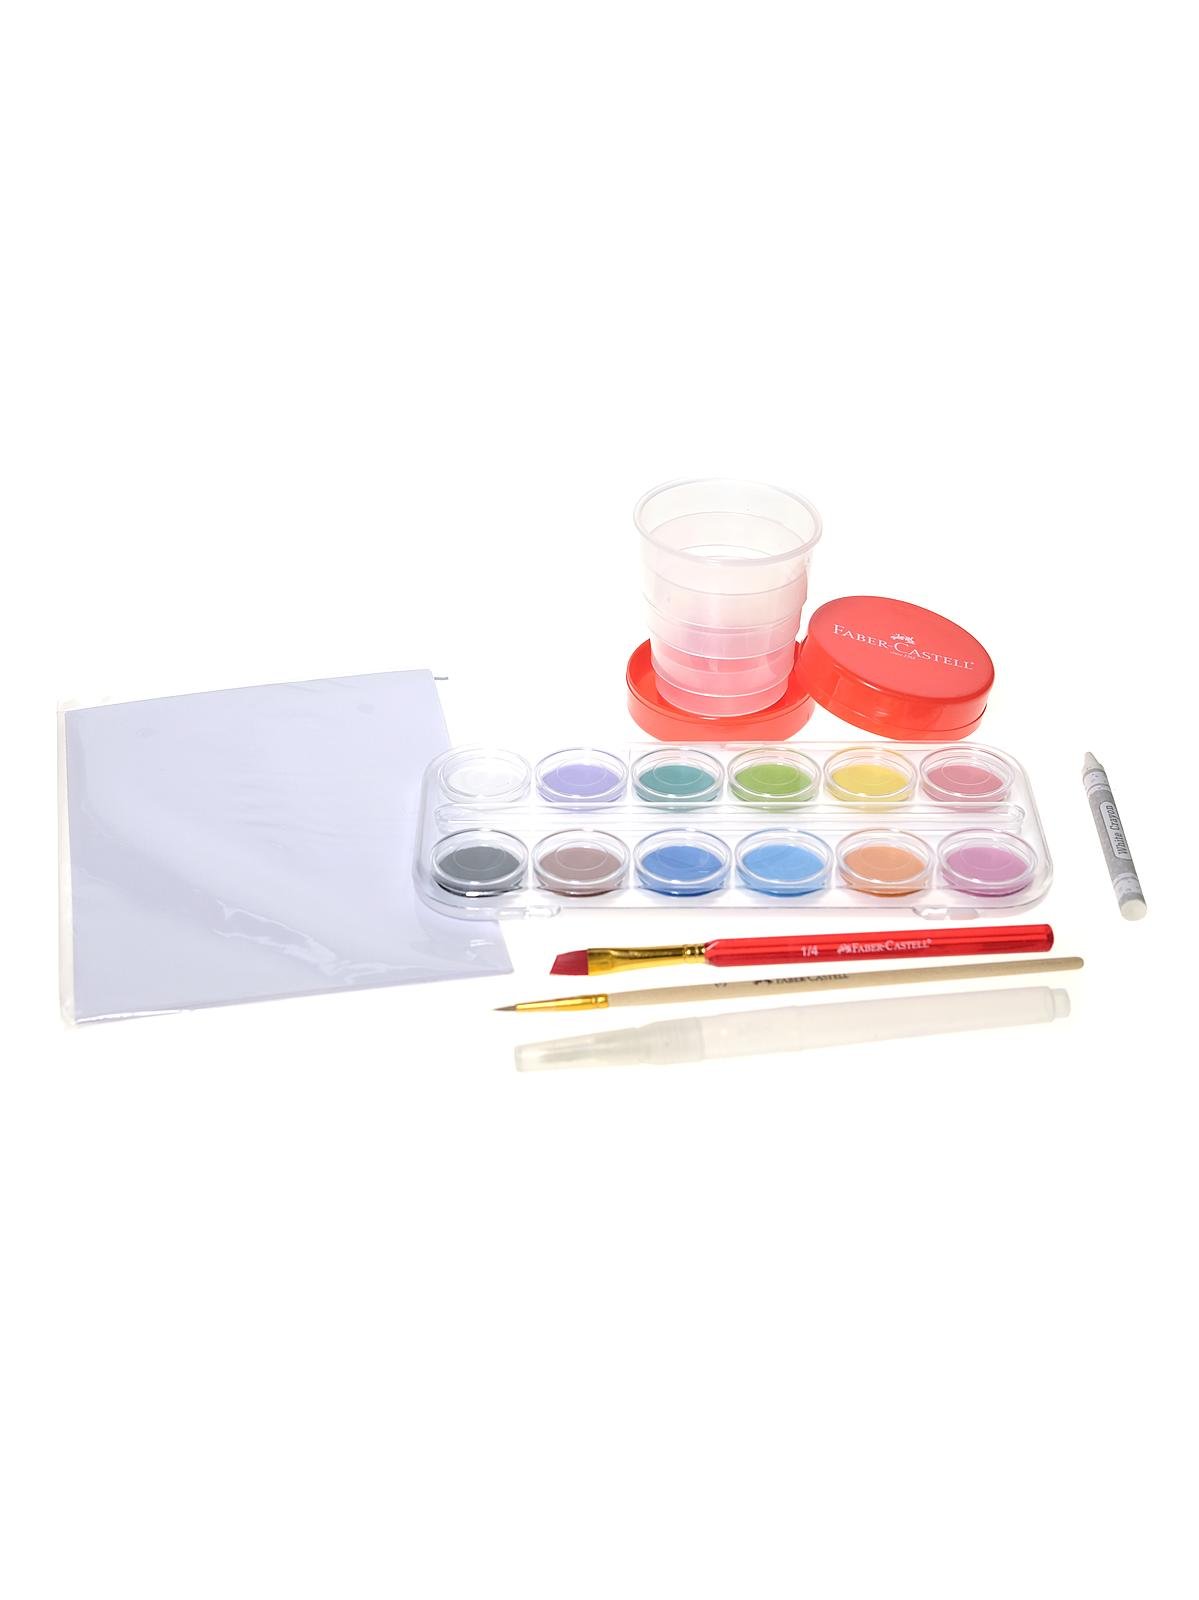  Faber-Castell Young Artist Learn to Paint Set